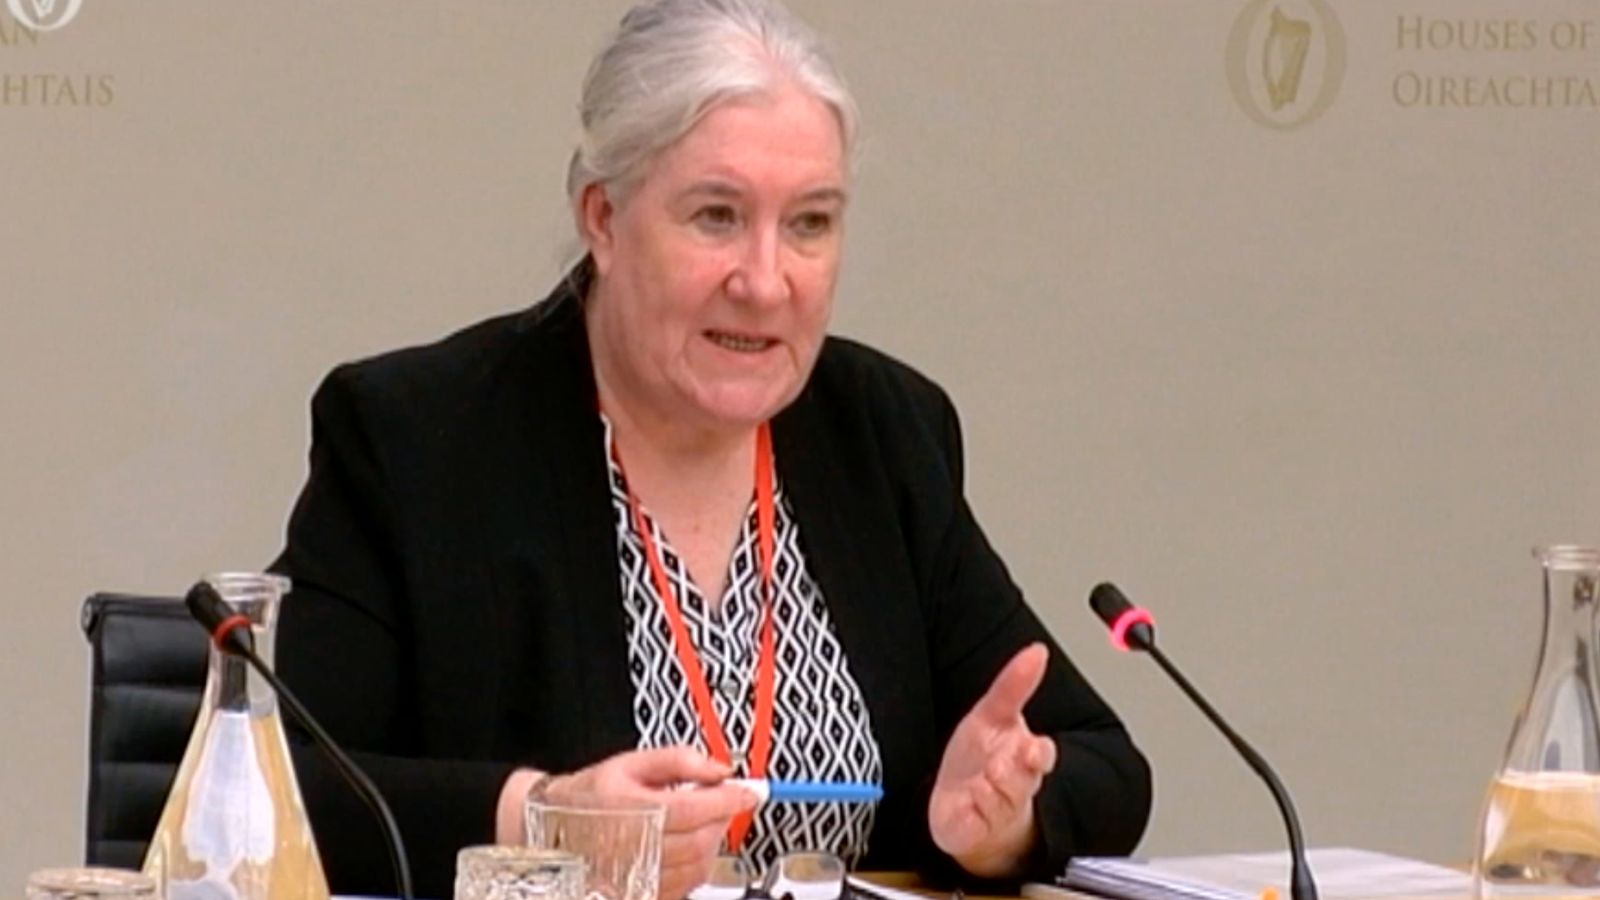 Image - In 2017, Ms Farrell addressed the Oireachtas Committee on Justice and Equality